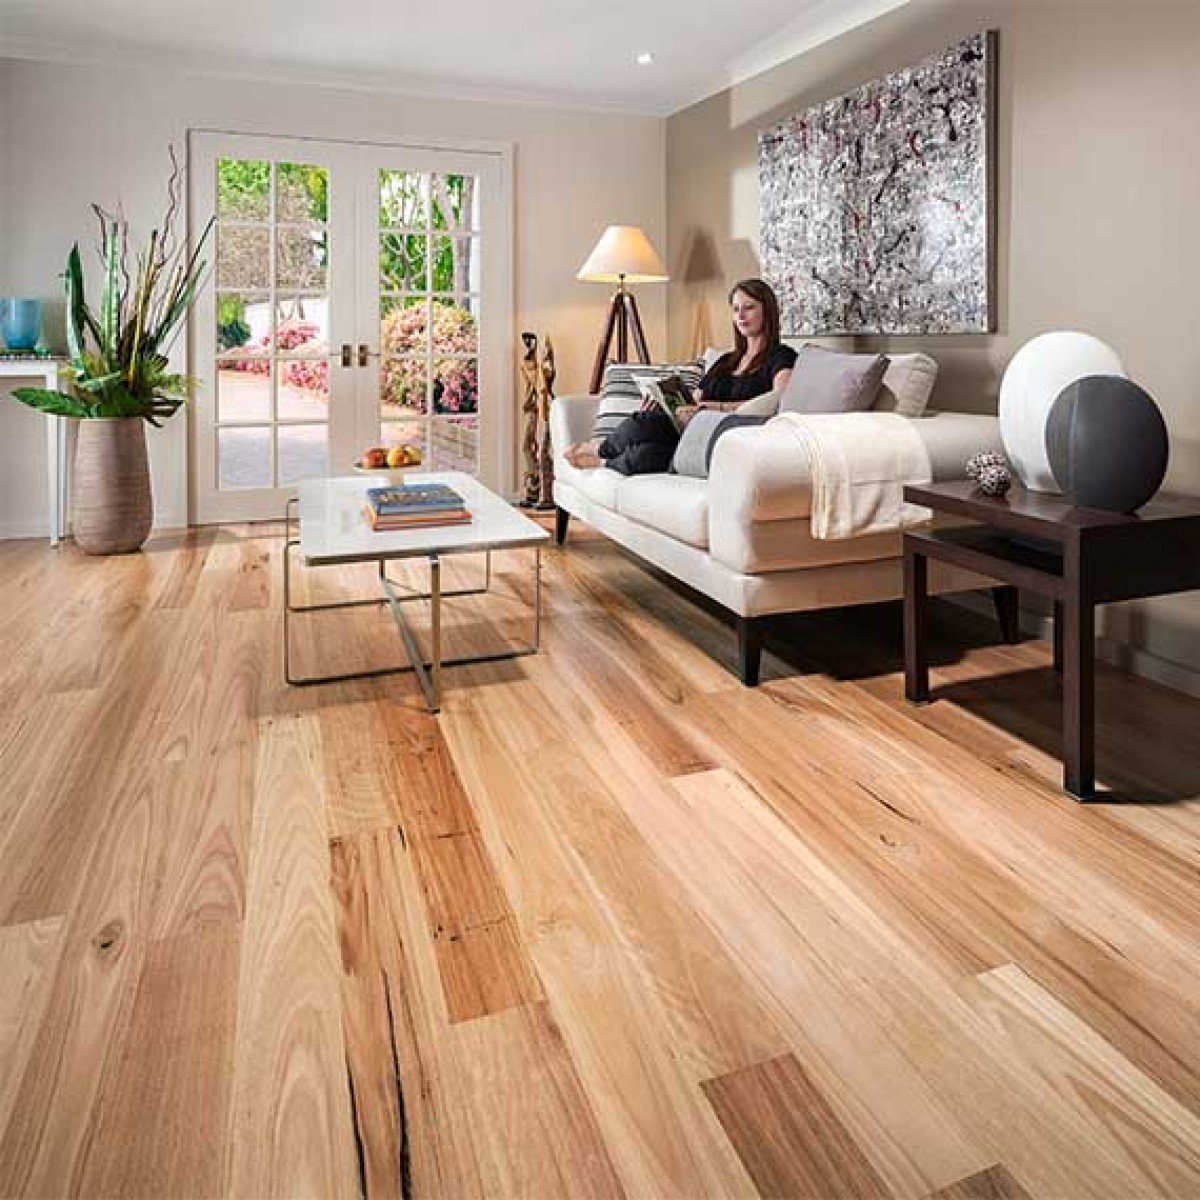 American Oak Flooring: Know More About The Best Option Available For